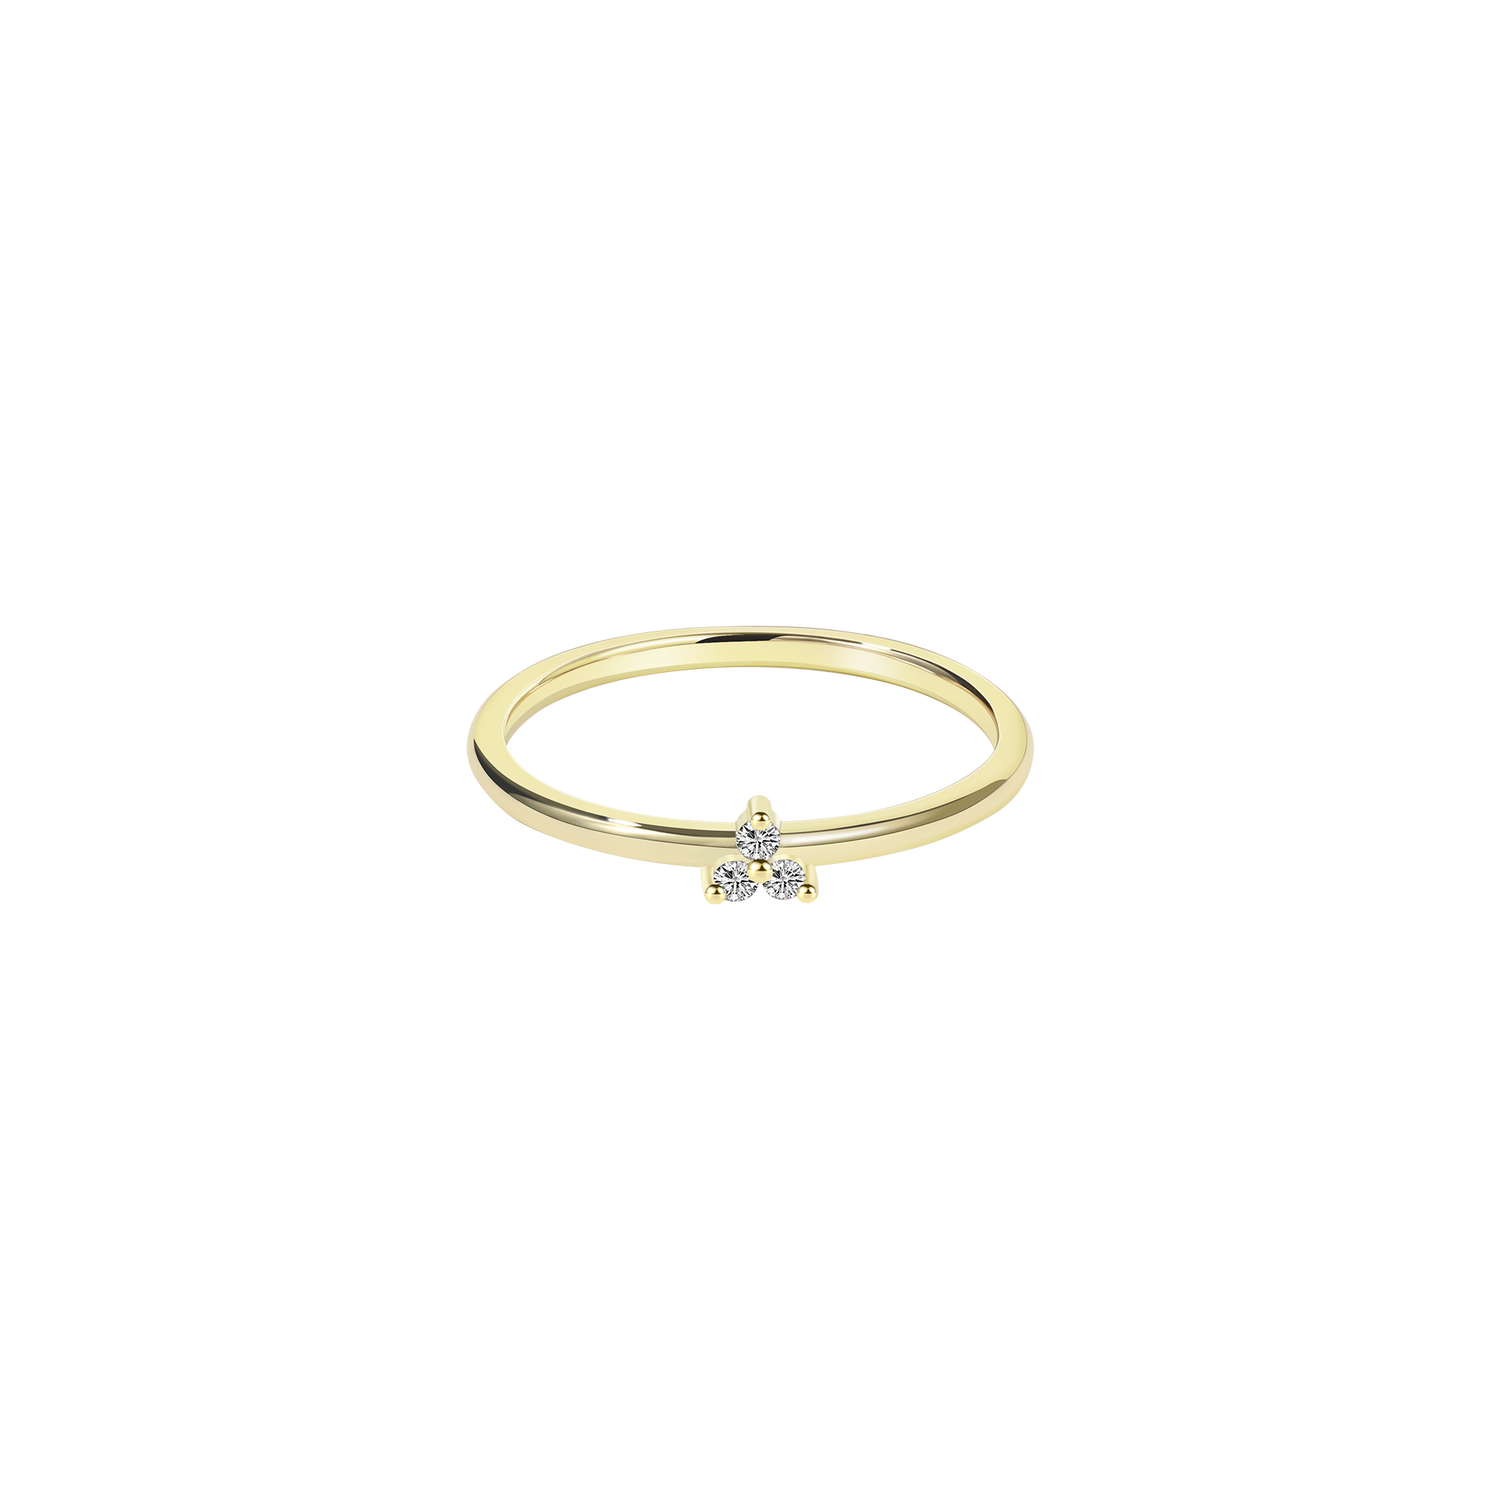 Diamond Ring,14K Gold Ring,10K Gold Ring,Meaningful Gifts,No Customized Rings